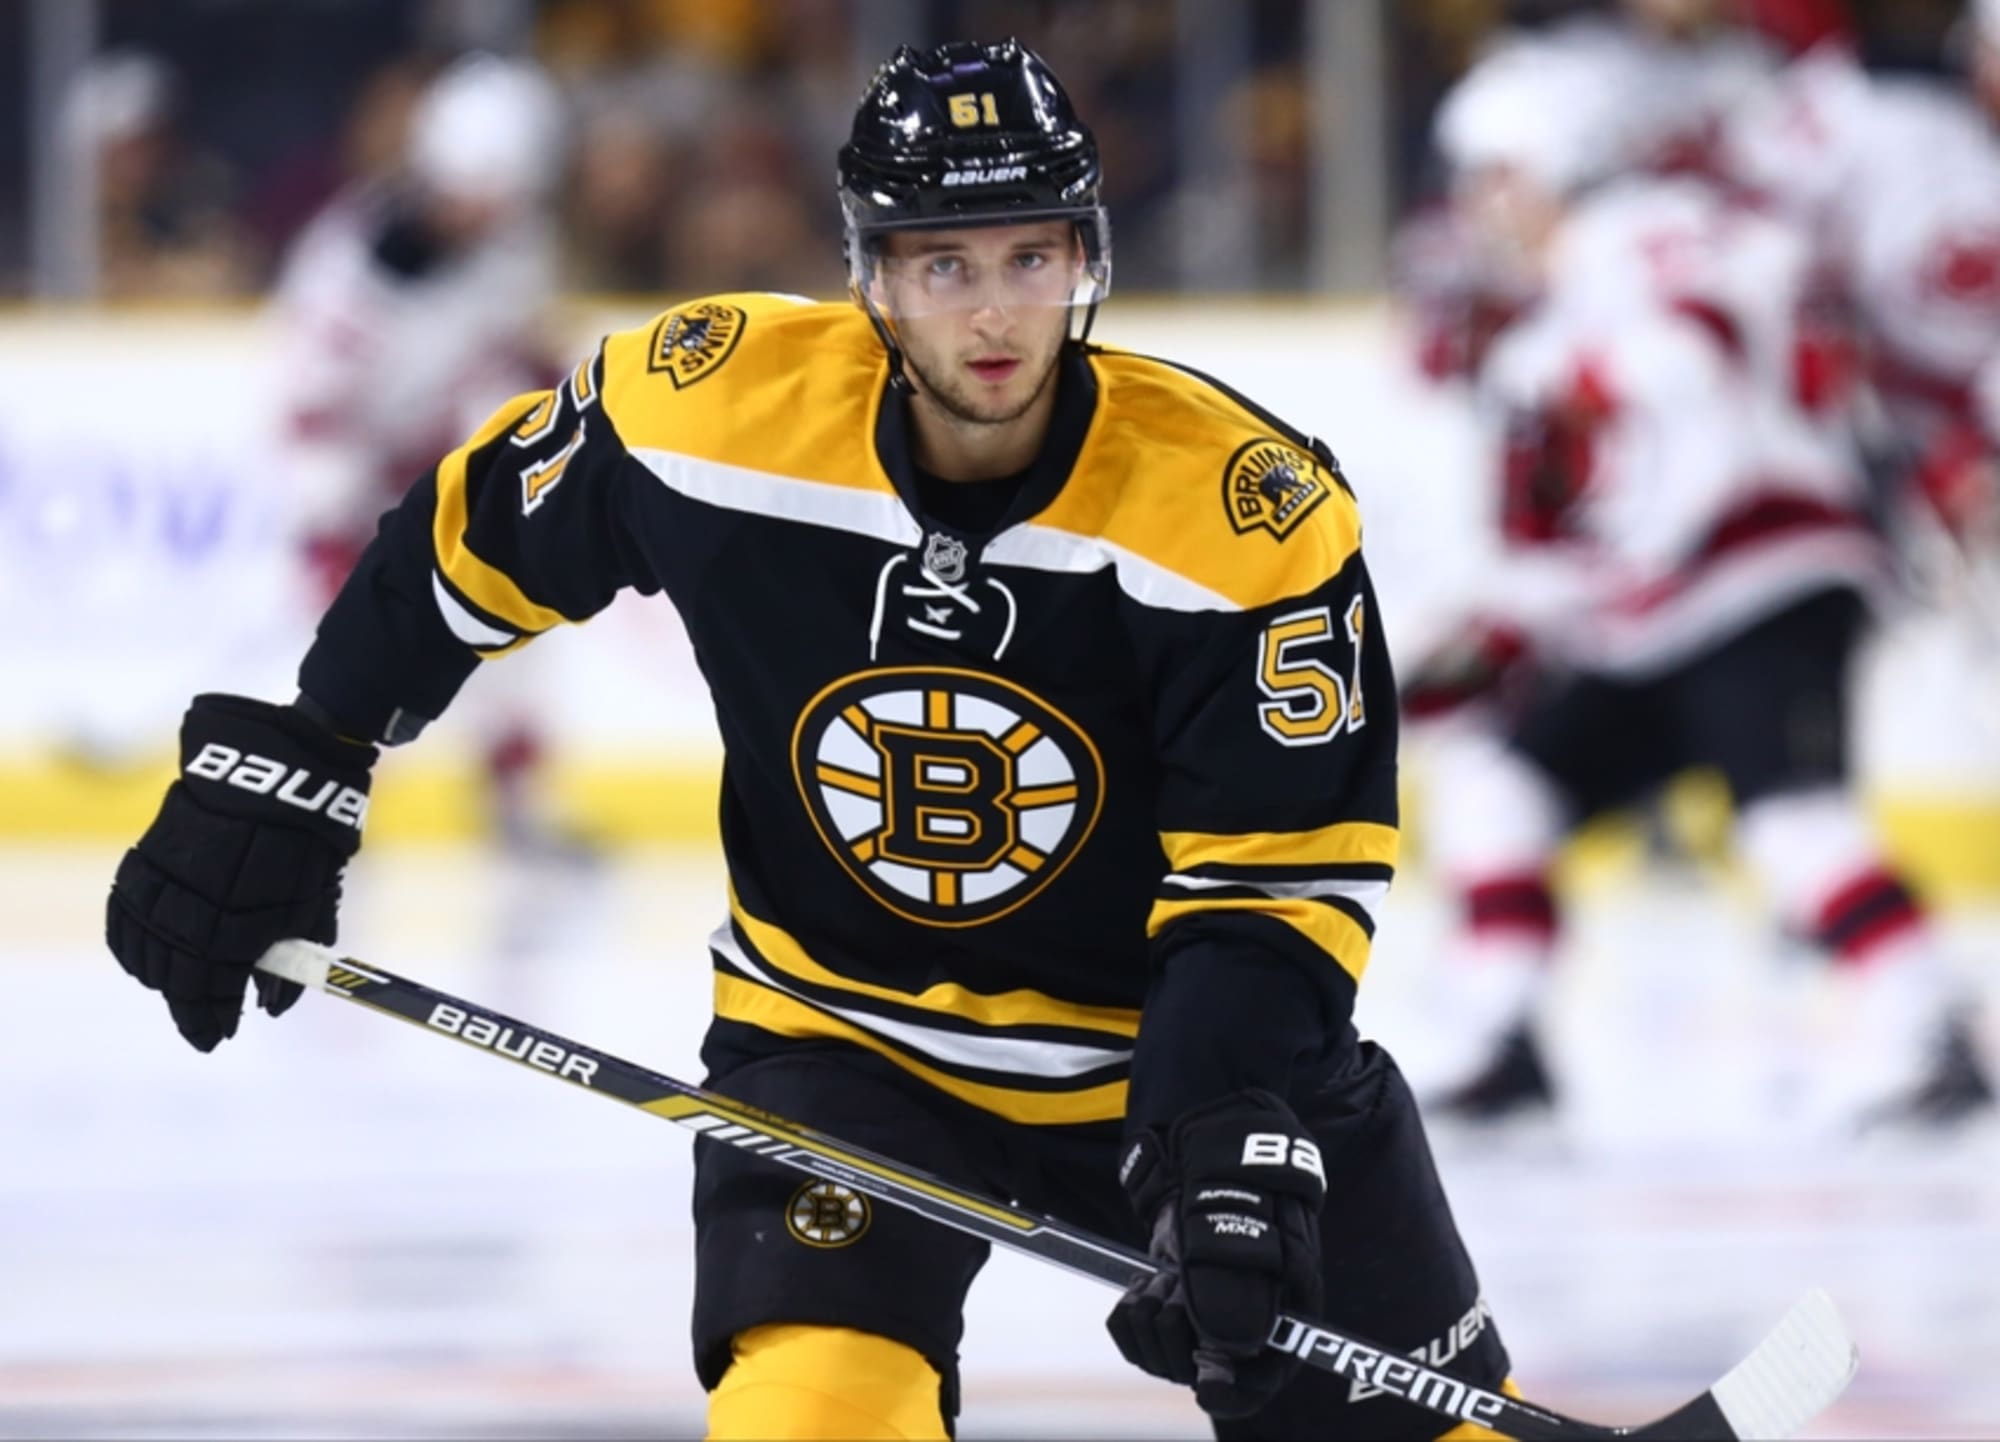 Ryan Spooner still in the mix, but Boston Bruins' roster getting